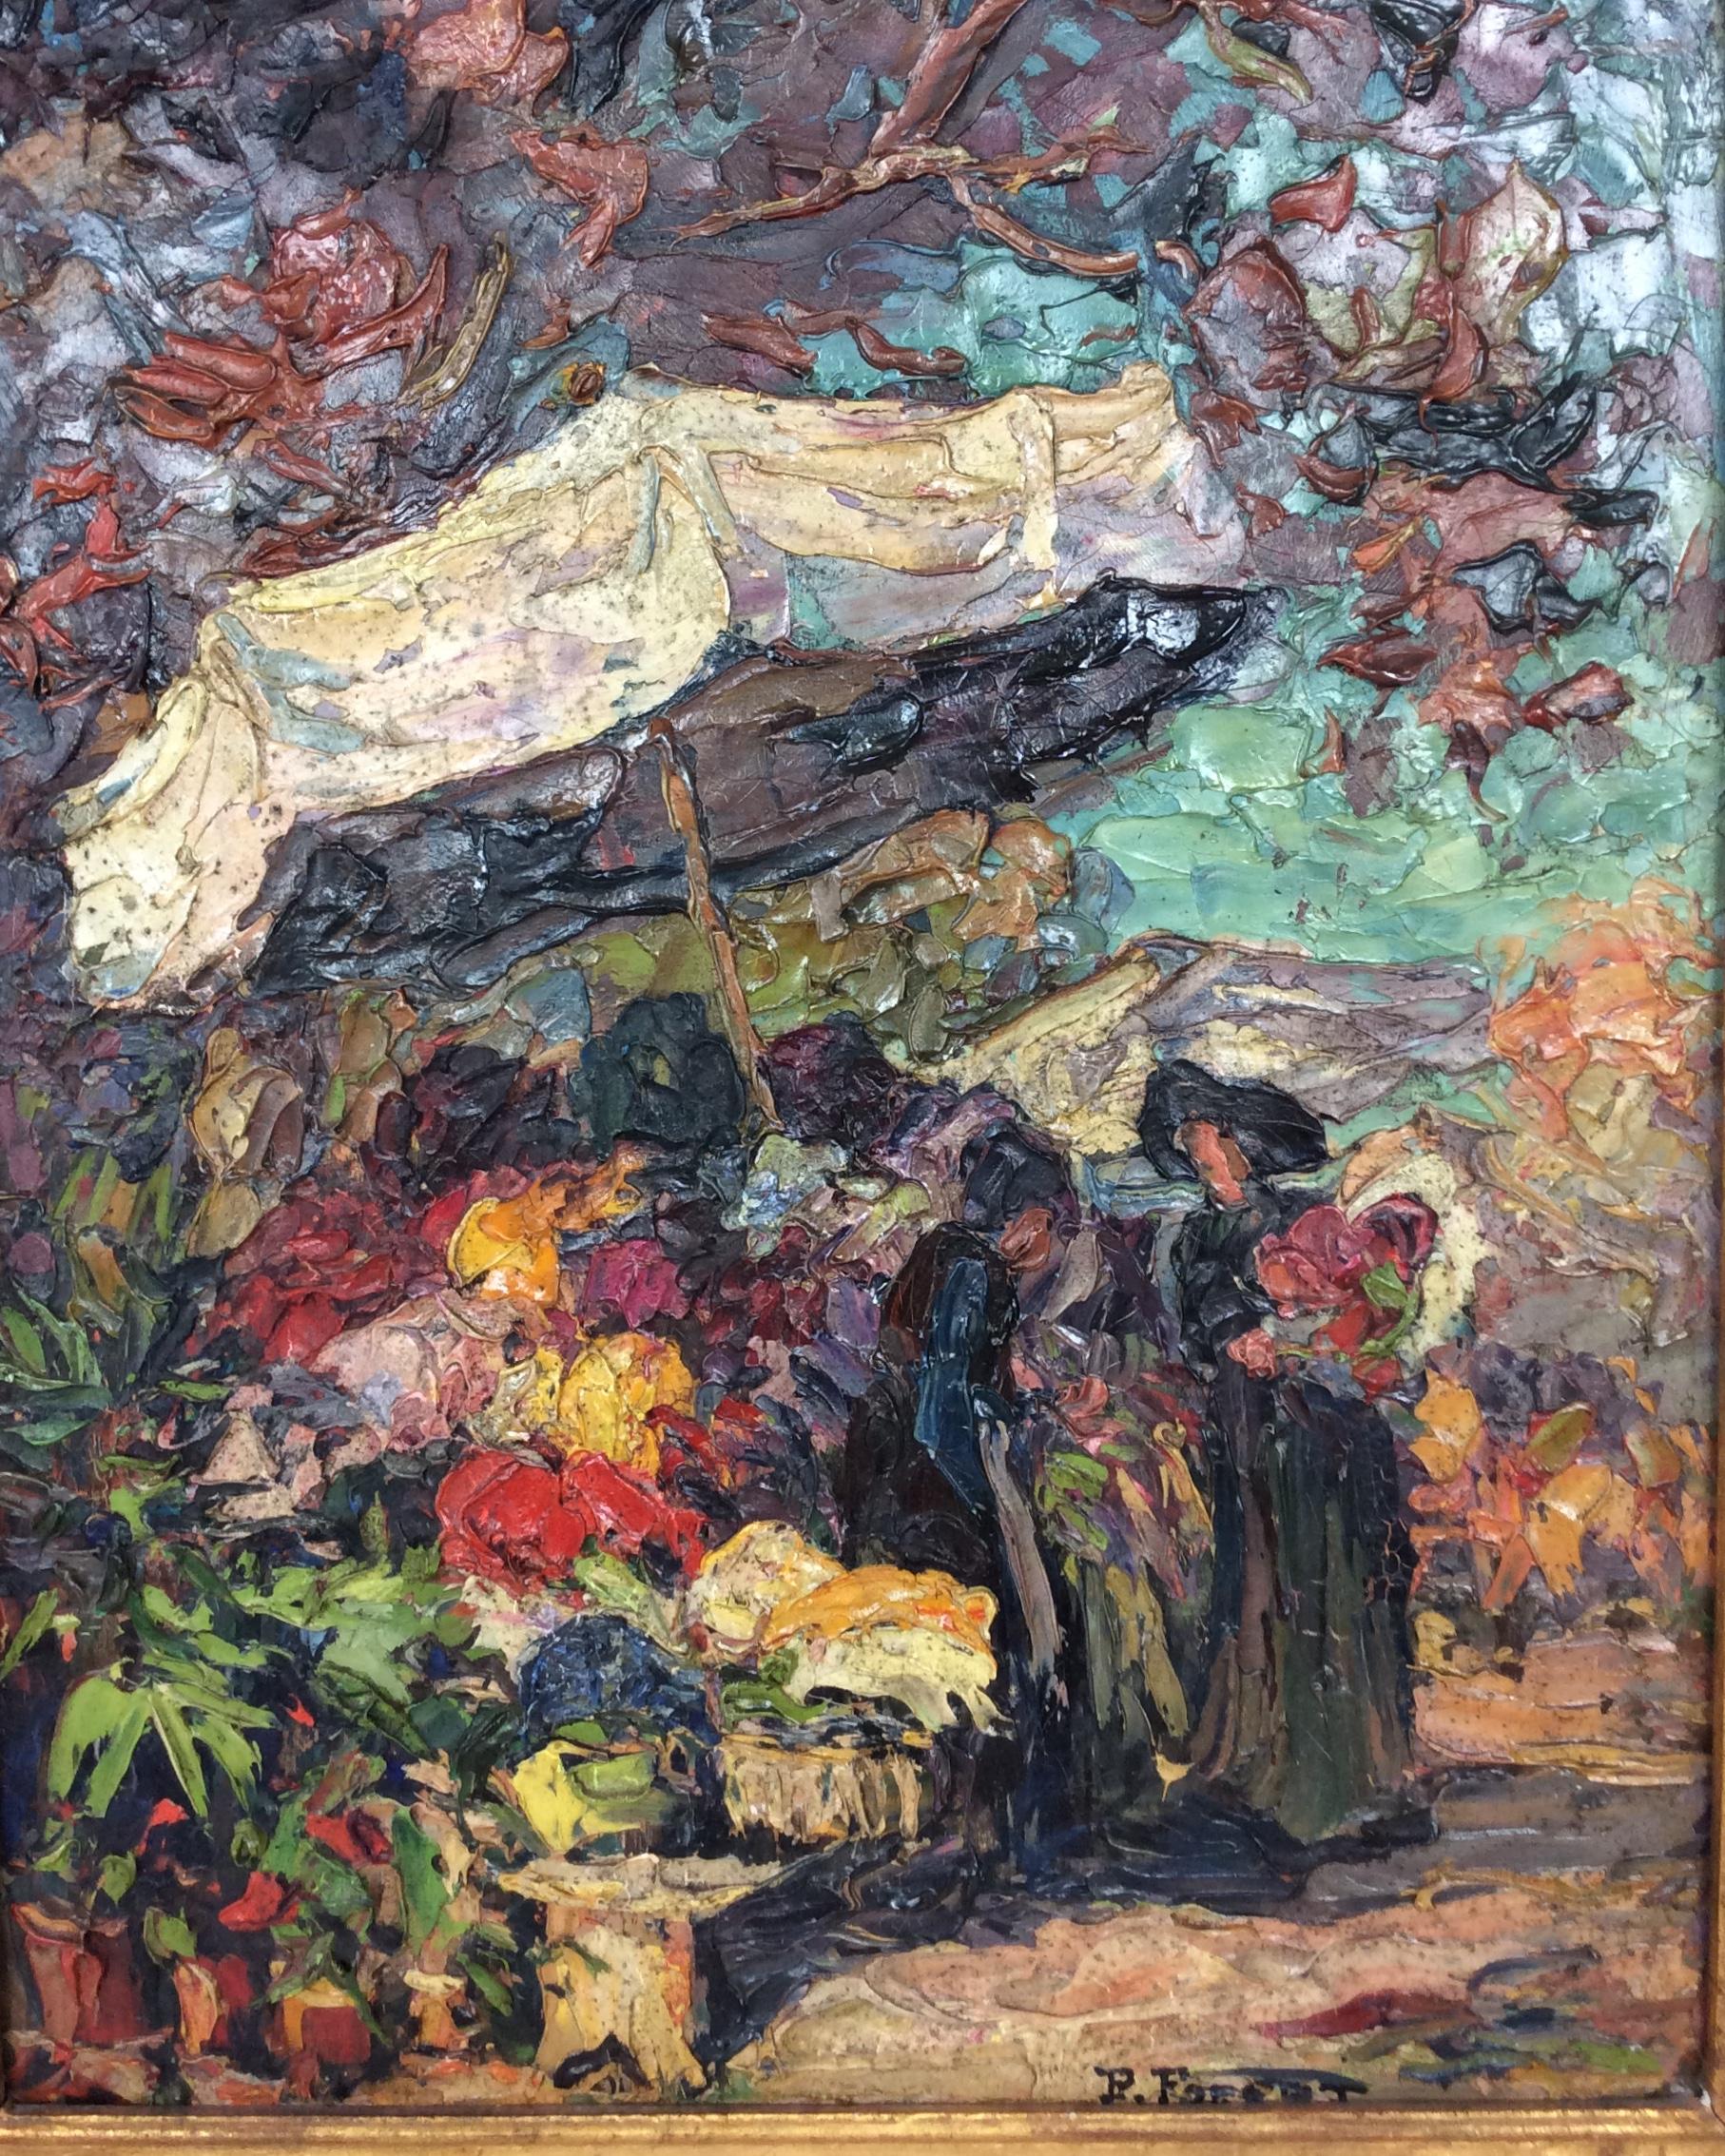 This is an original oil on wood painting depicting Cours Saleya 